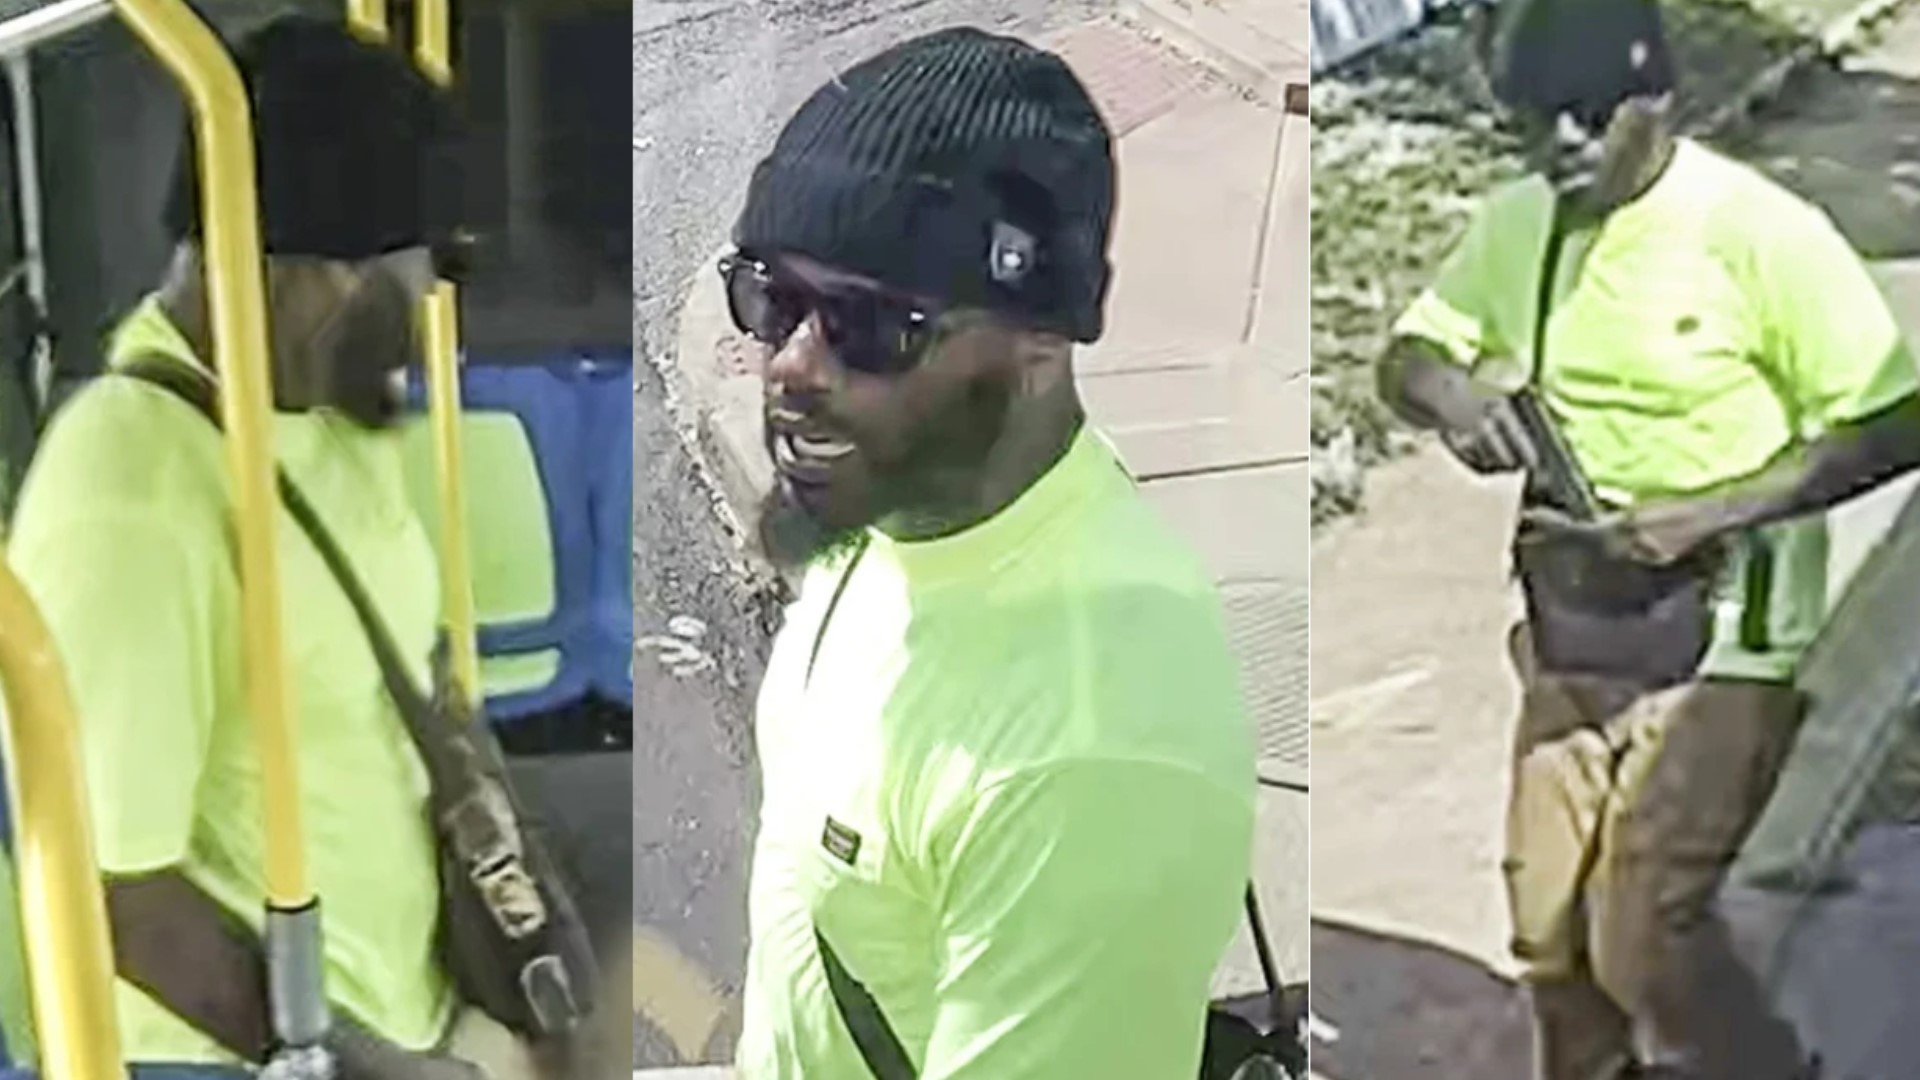 According to the FBI, the unknown suspect violently attacked and pointed a gun at a transgender victim at about 3:30 p.m. on April 13 aboard a MetroBus.